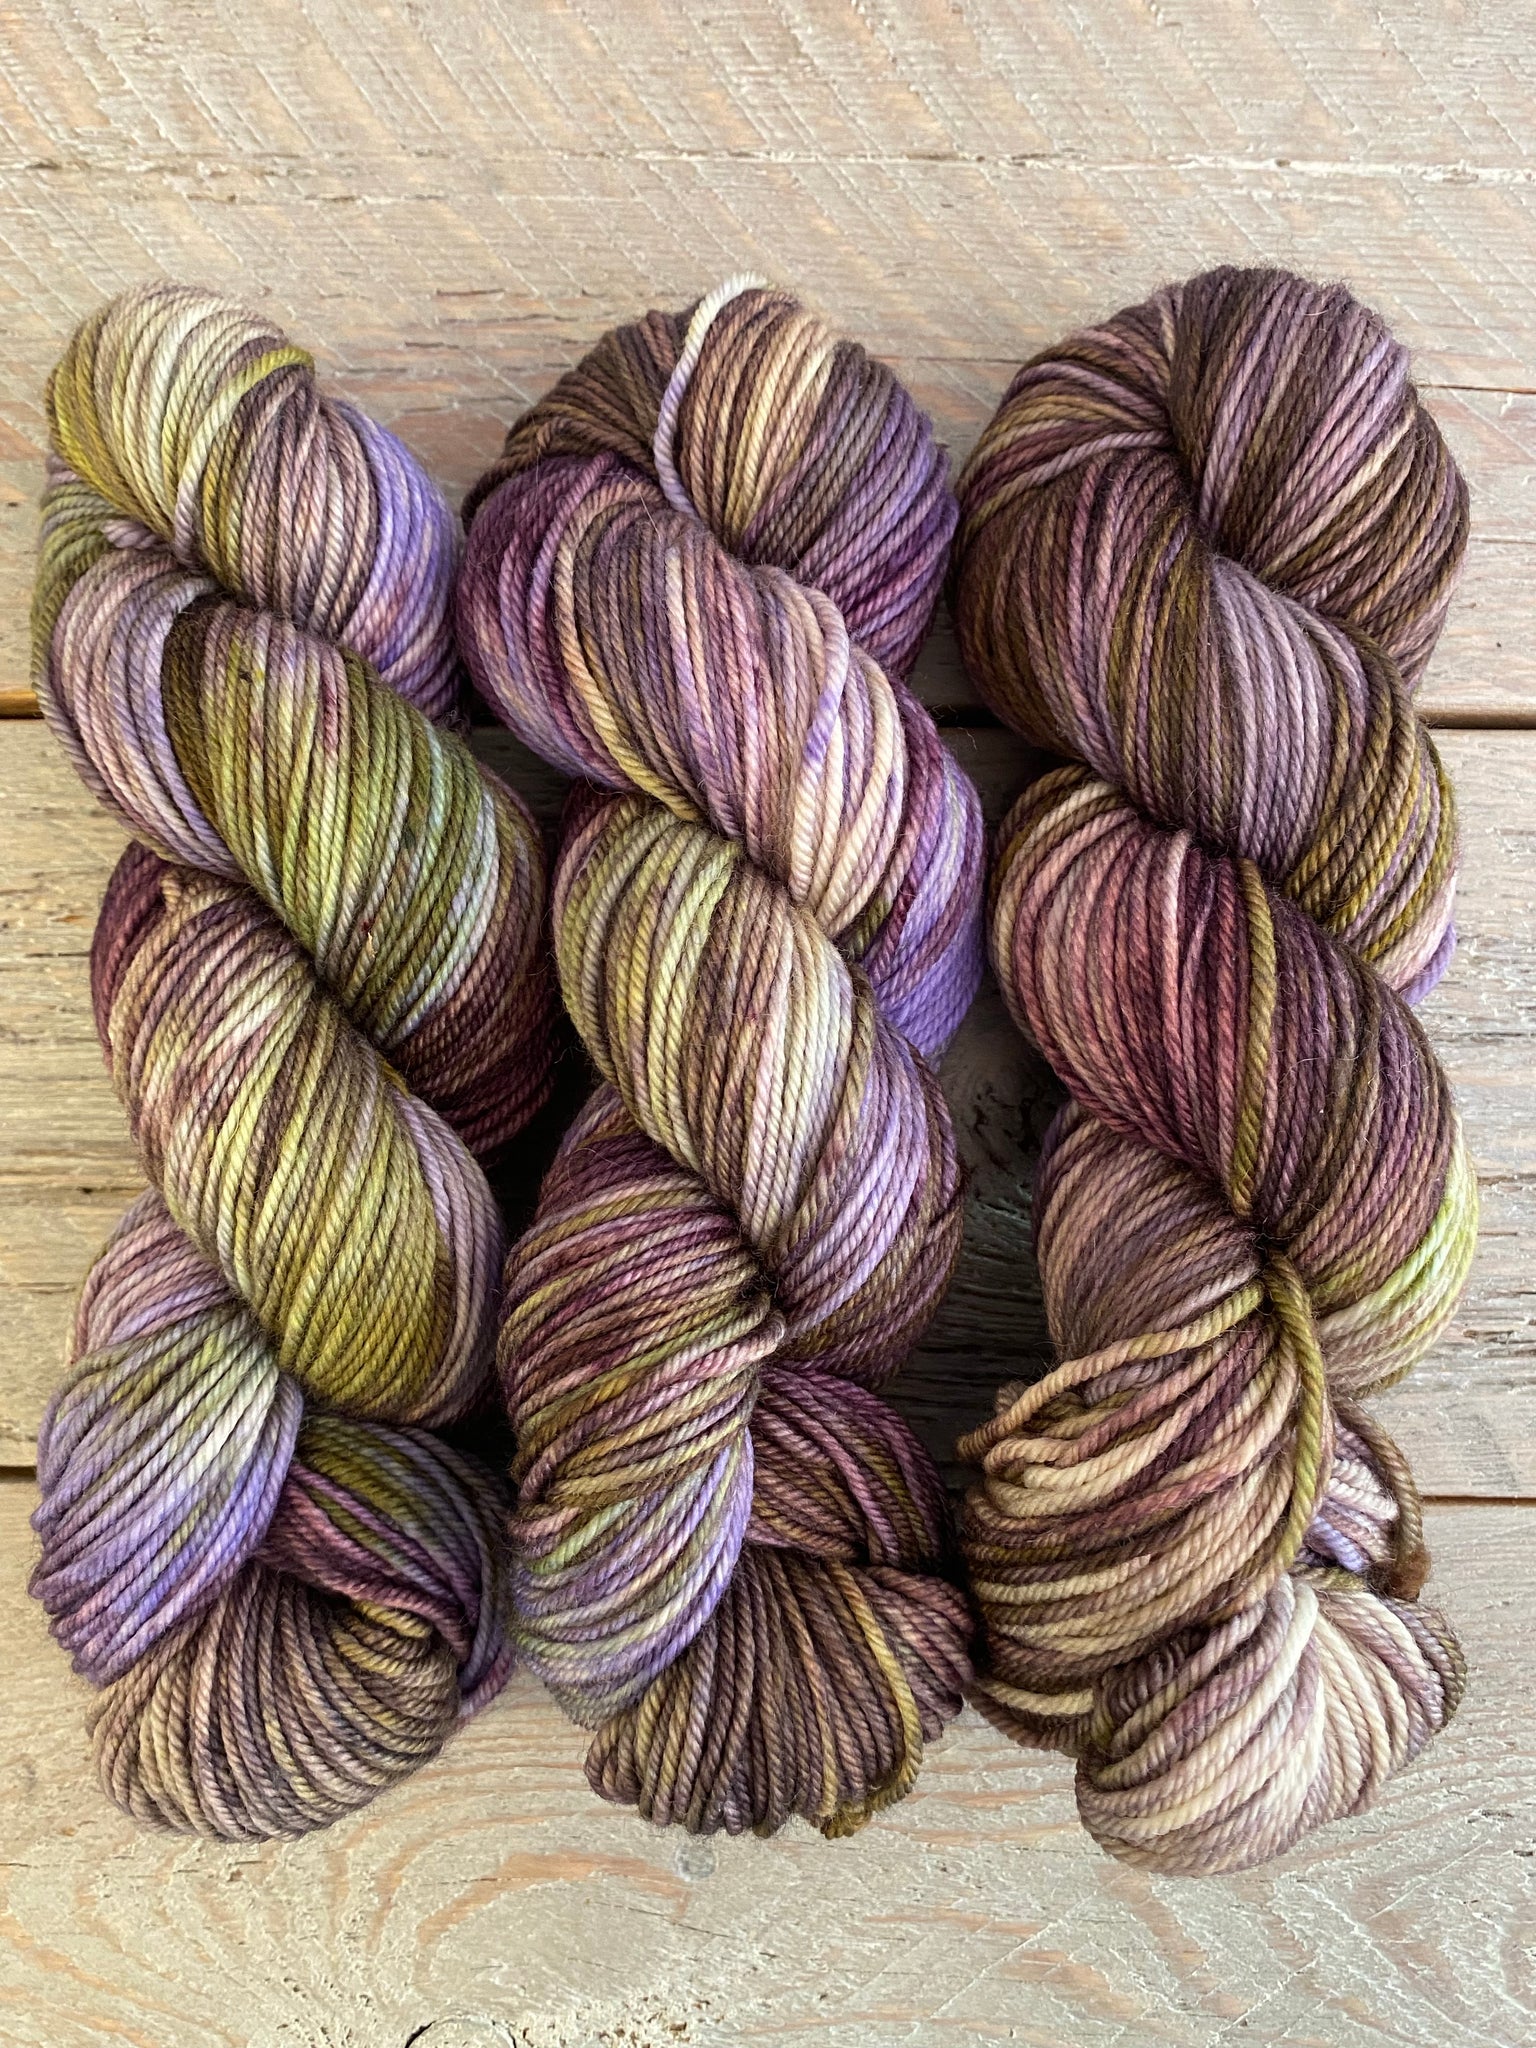 Intuition on Classic Worsted - Retired